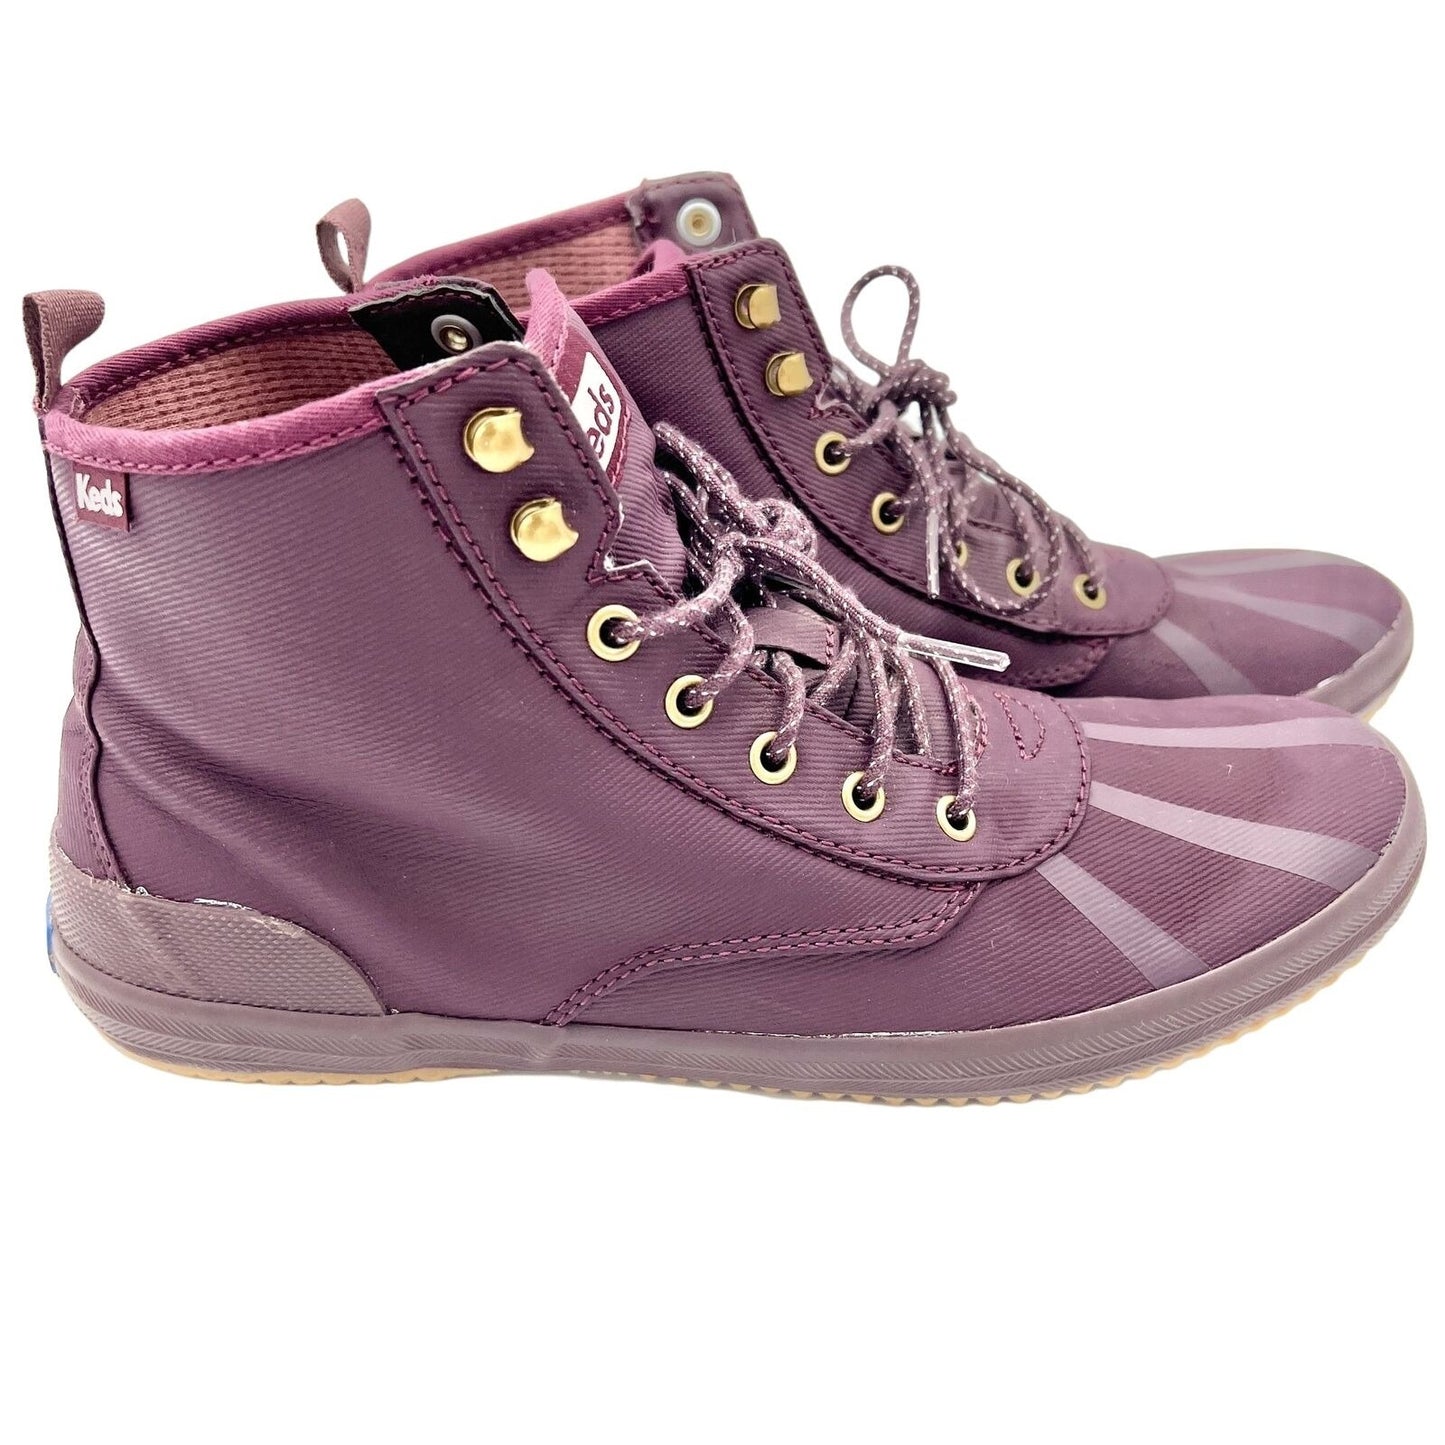 Keds 10 Dream Wine Color Lace Up Short Boots – Tiffany's Treasures and Trinkets